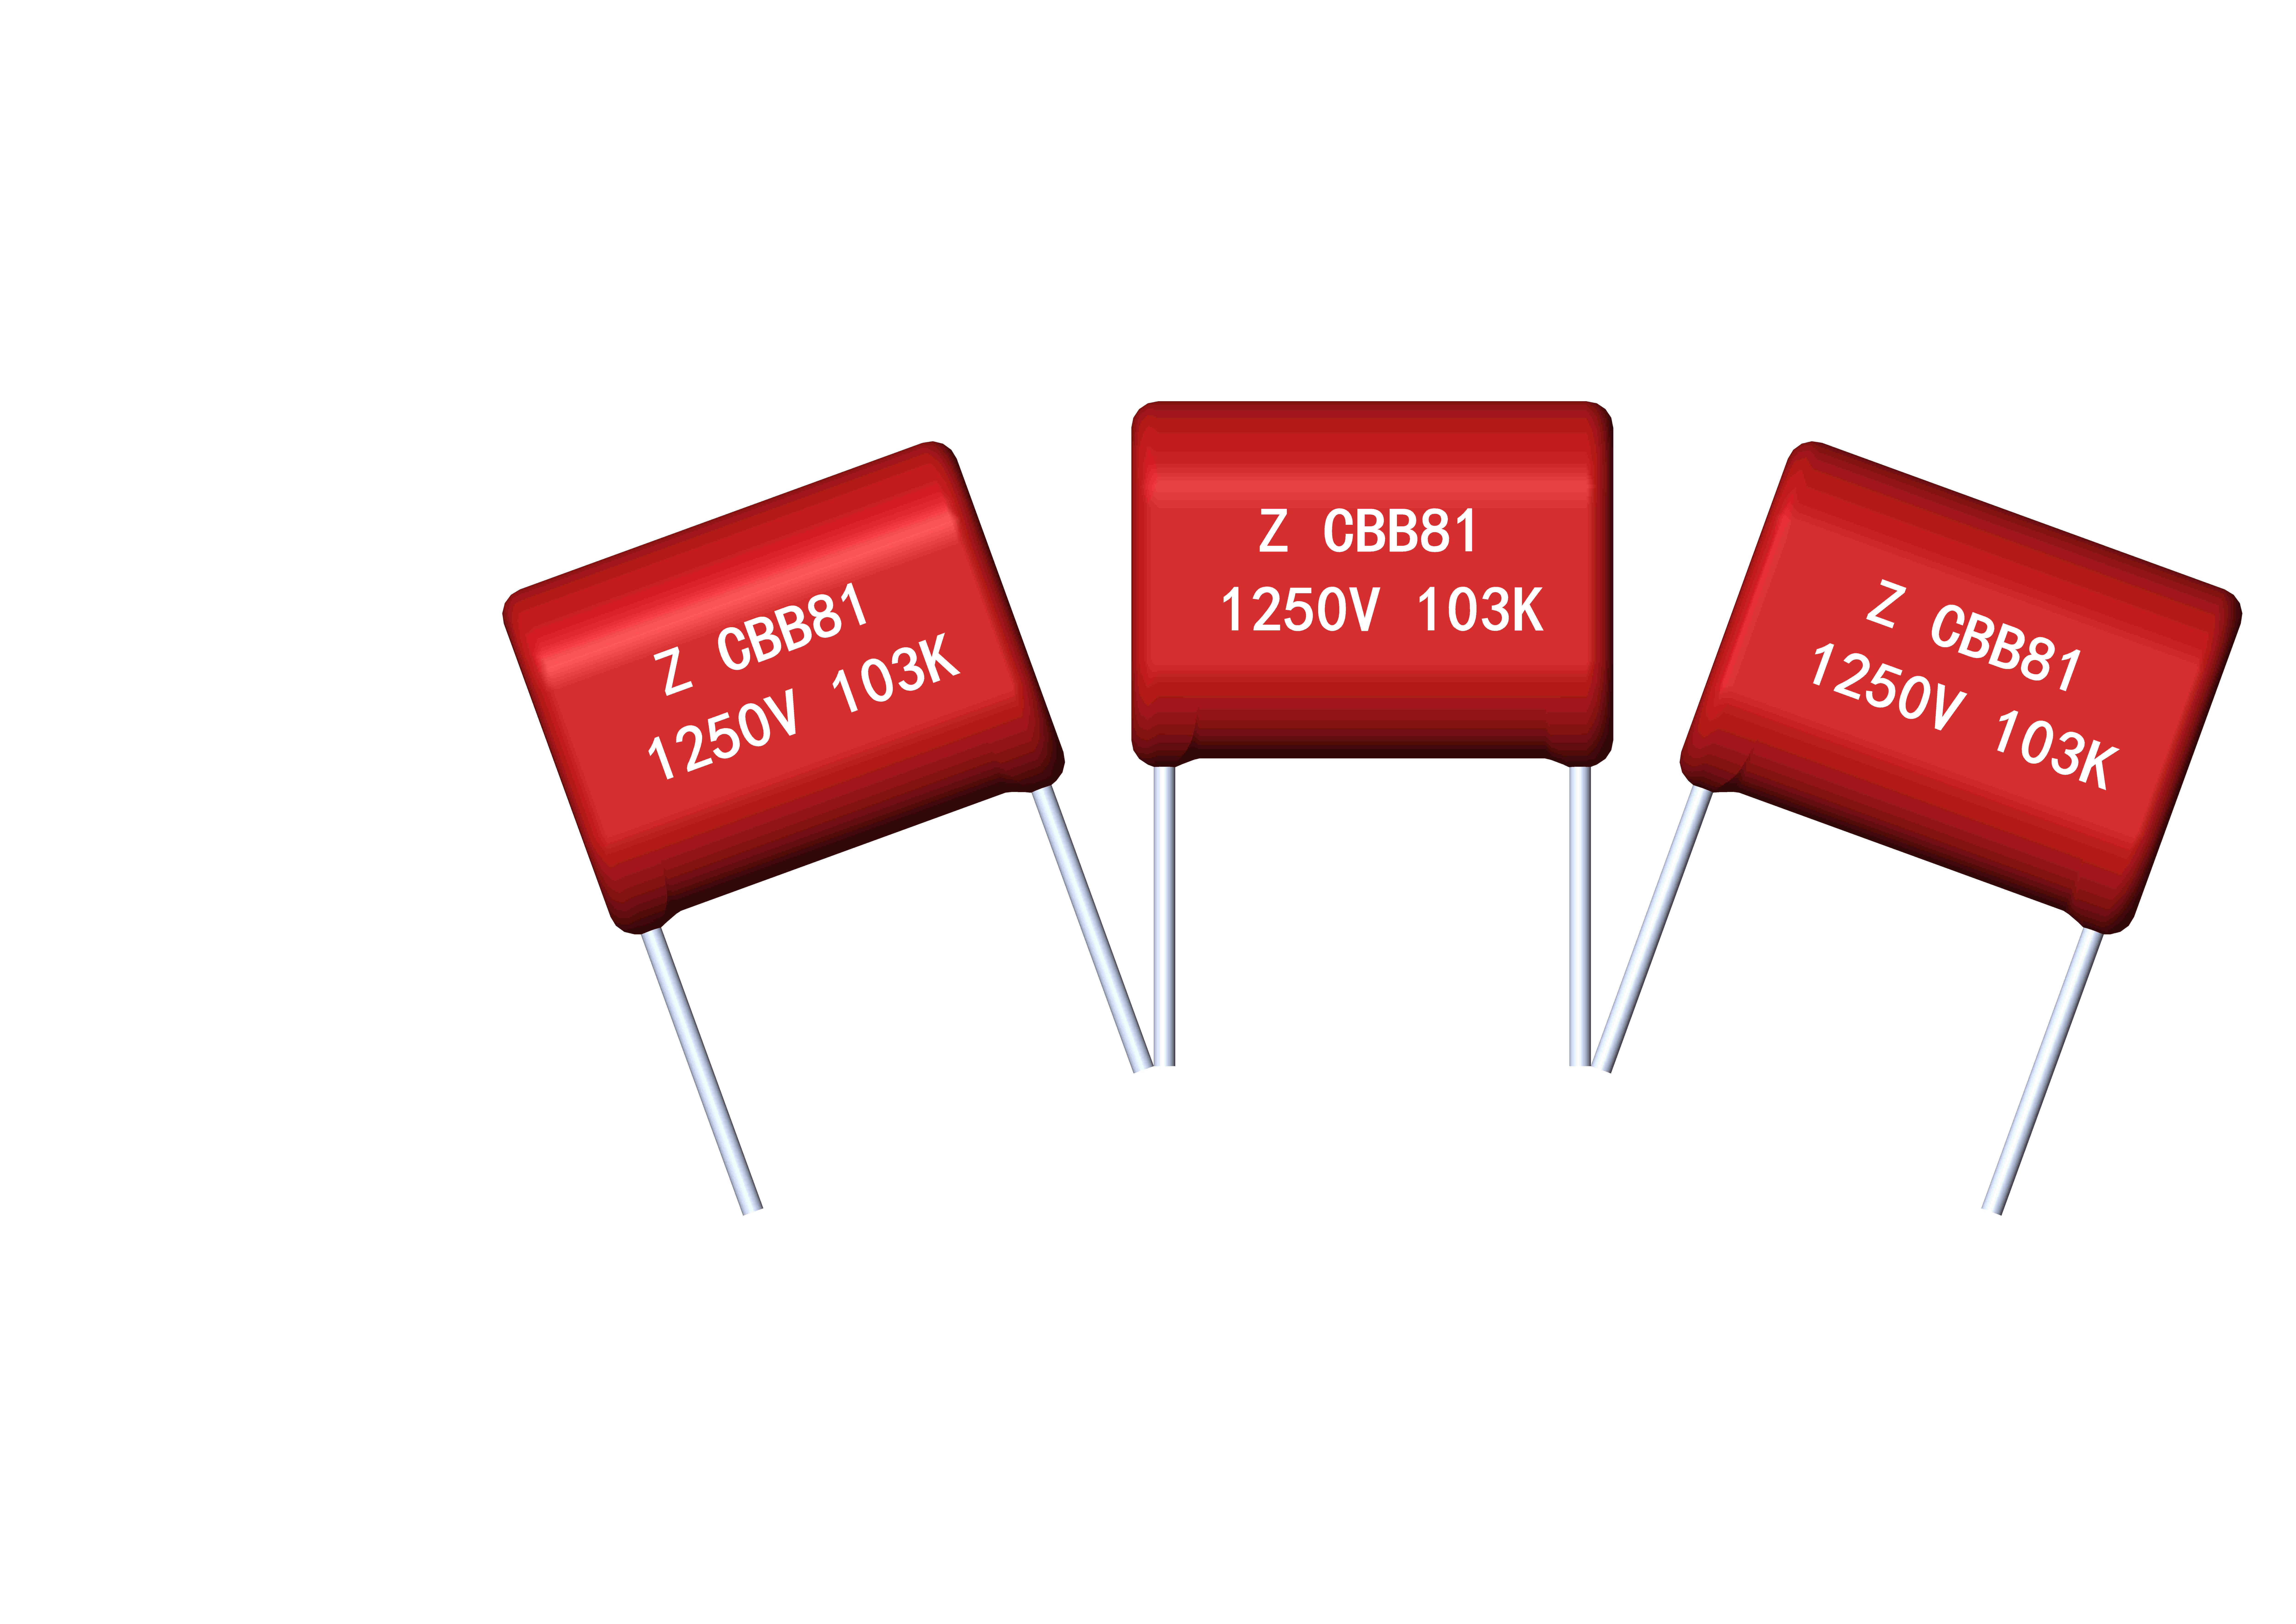 CBB81_Double sided metallized polypropylene film capacitor (Dipped)